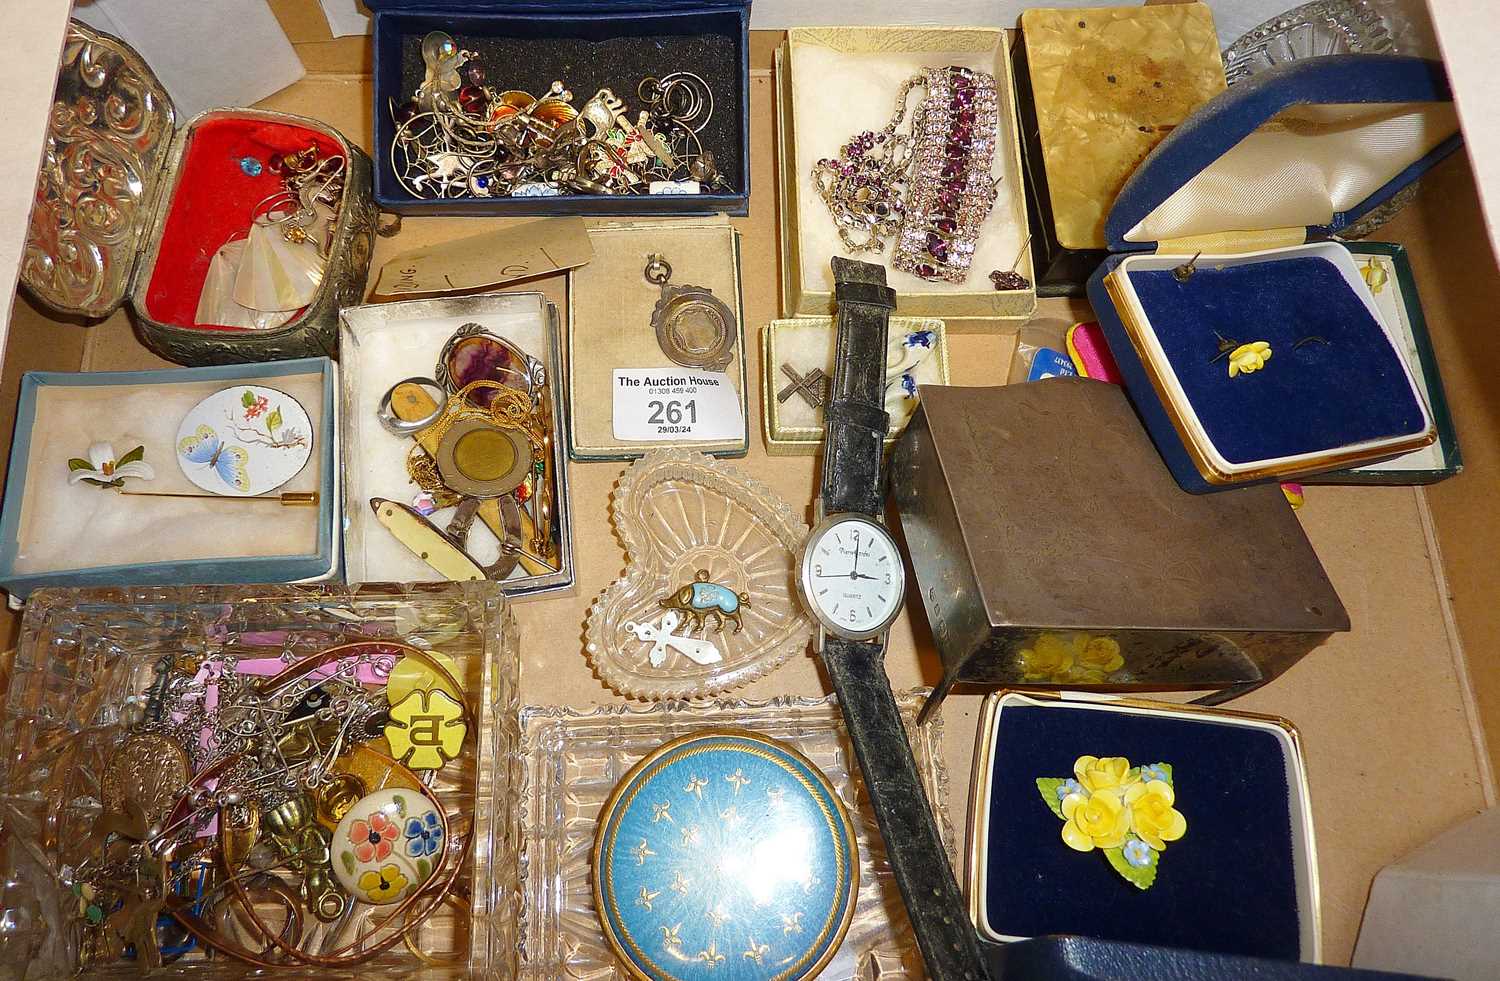 Vintage jewellery, some silver, hallmarked silver jewellery chest (missing a leg), old locket,